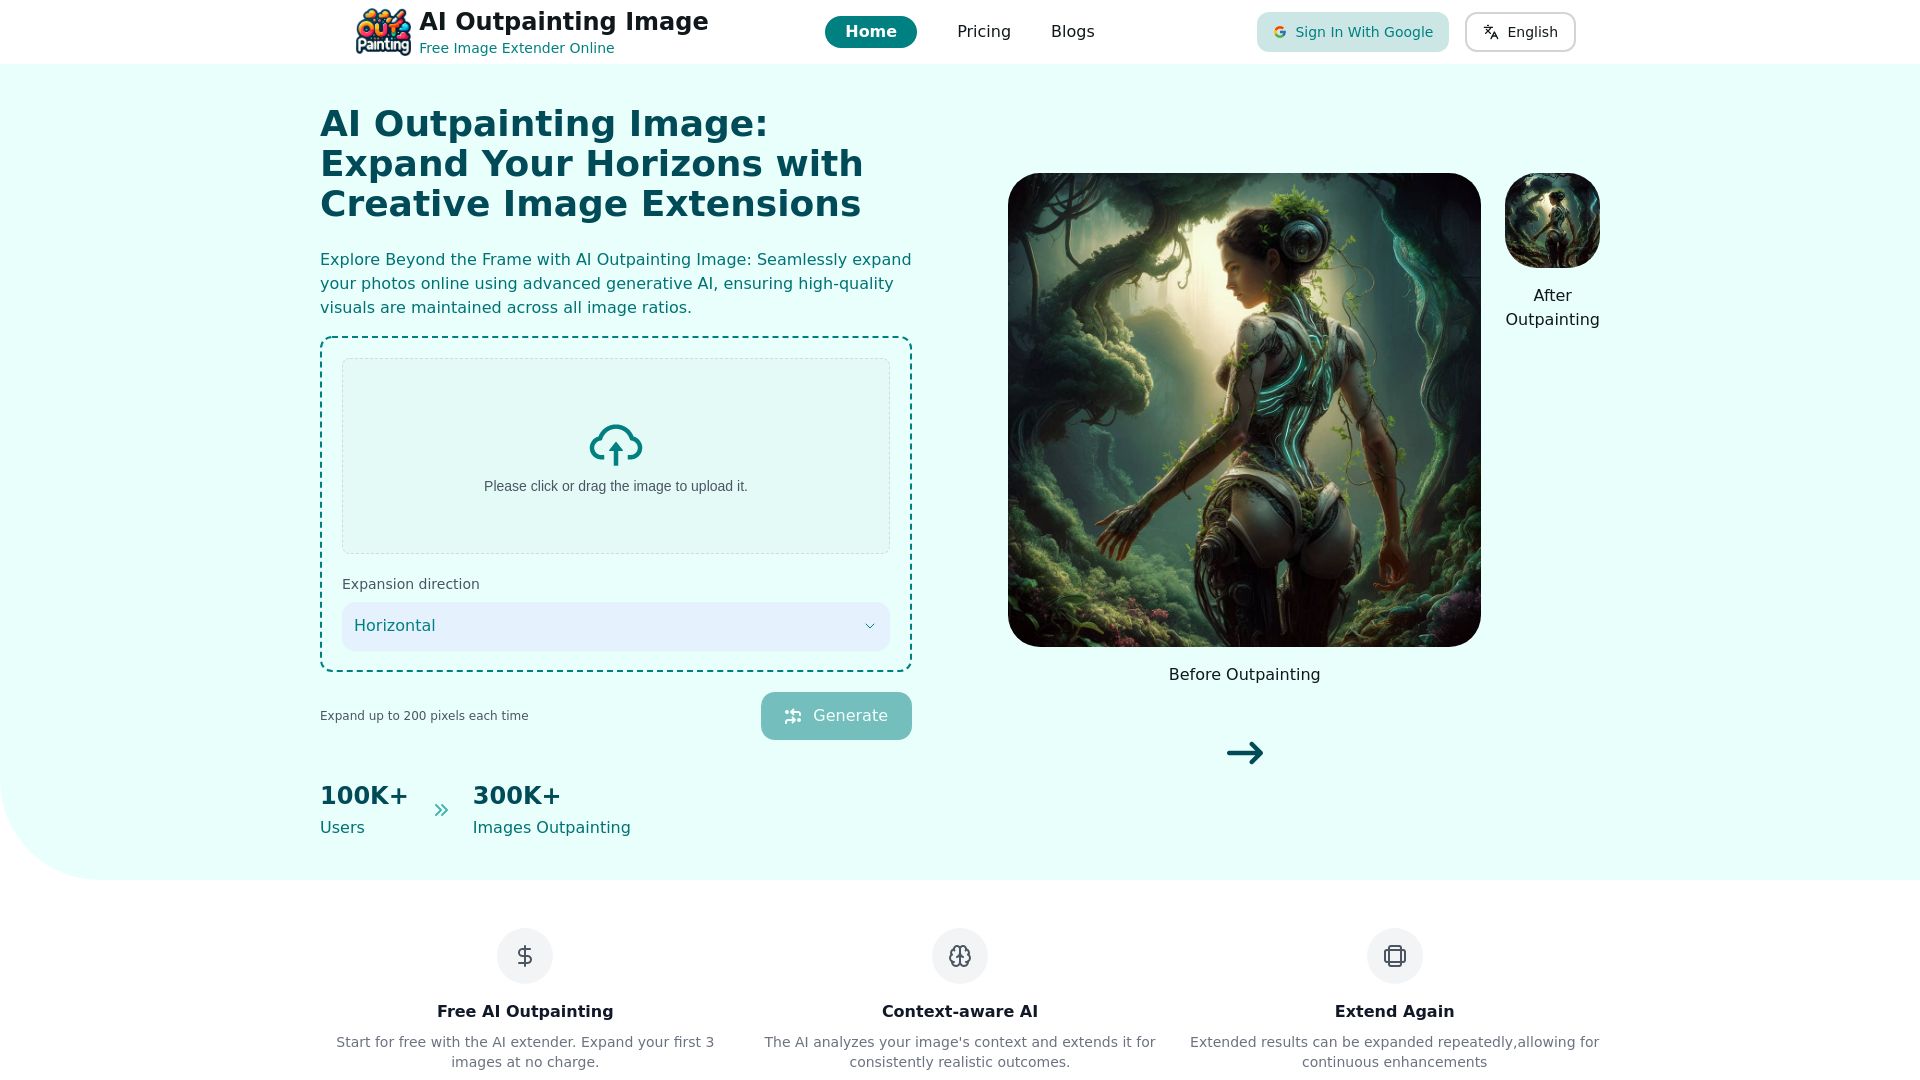 Free Online Tool For AI Image ExpandingAI Outpainting Image